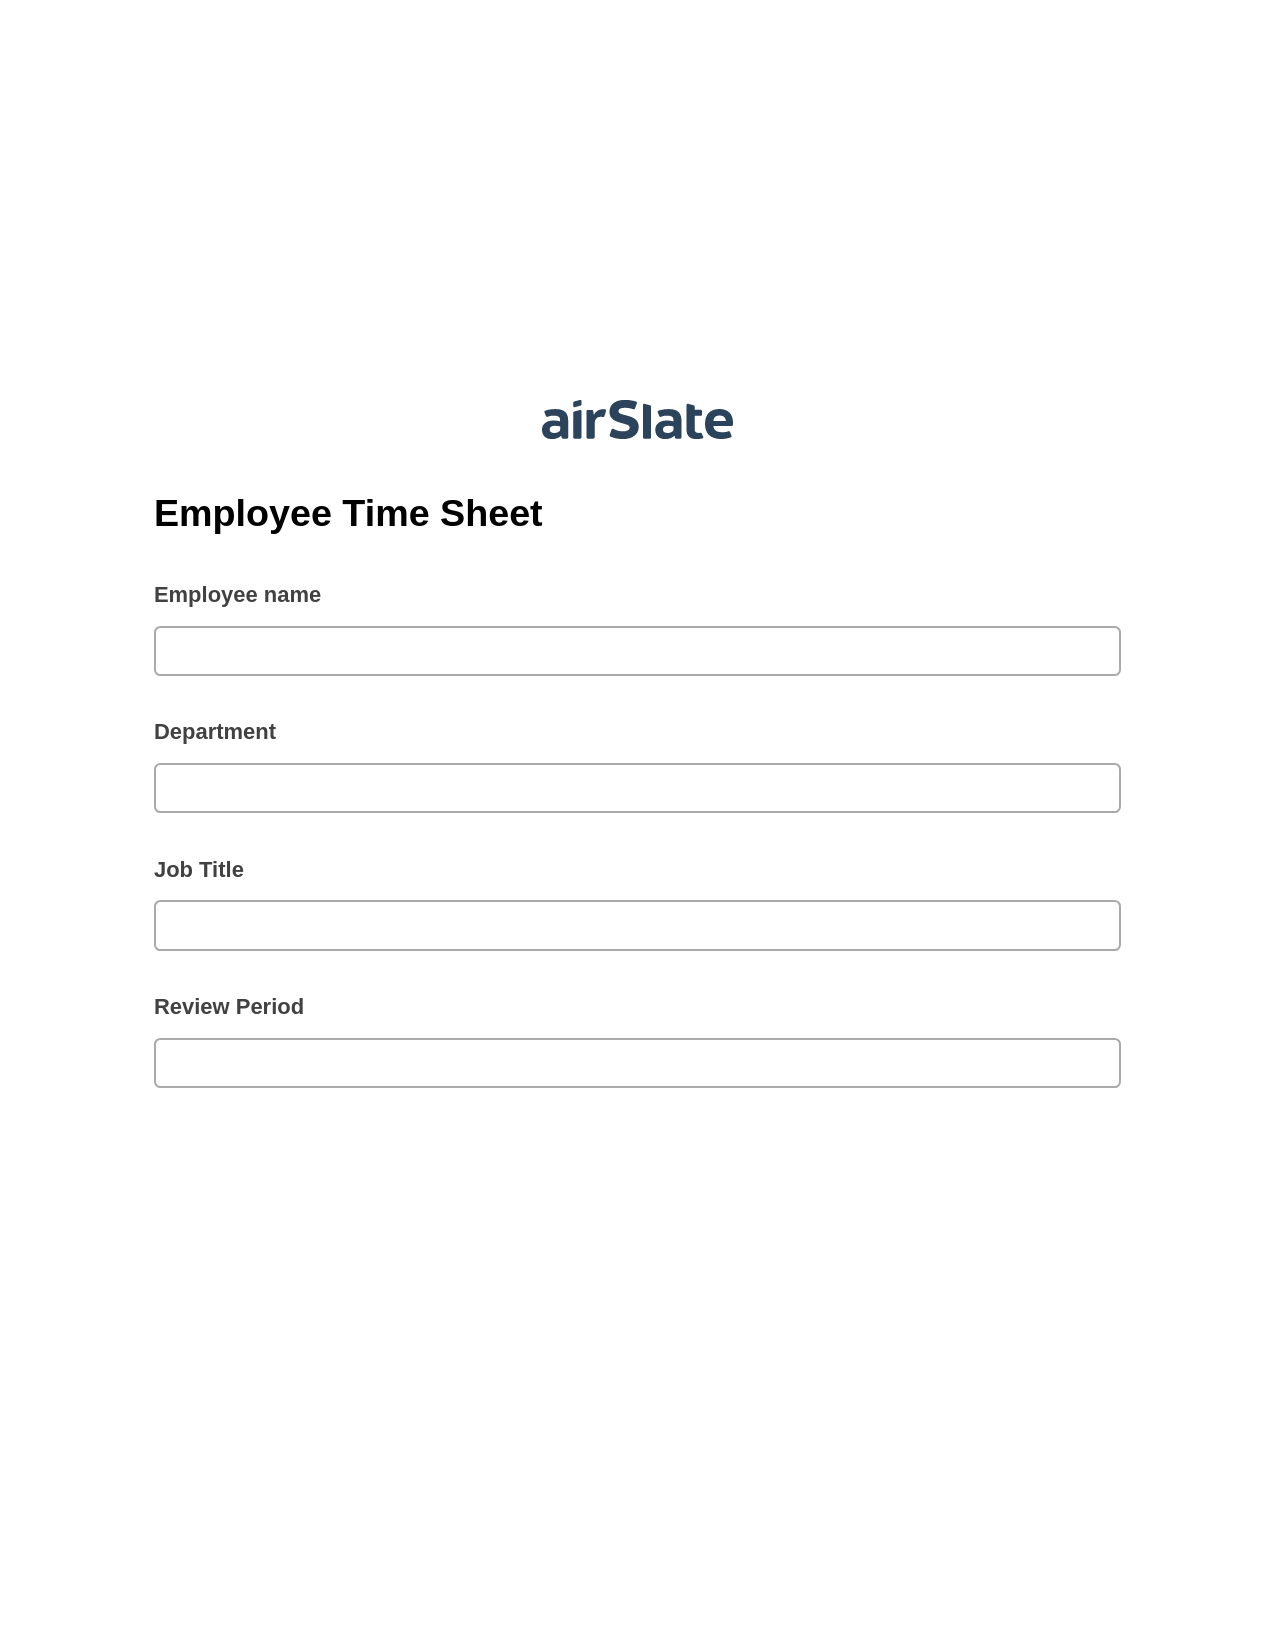 Employee Time Sheet Pre-fill from Excel Spreadsheet Bot, Create Salesforce Records Bot, Export to NetSuite Bot